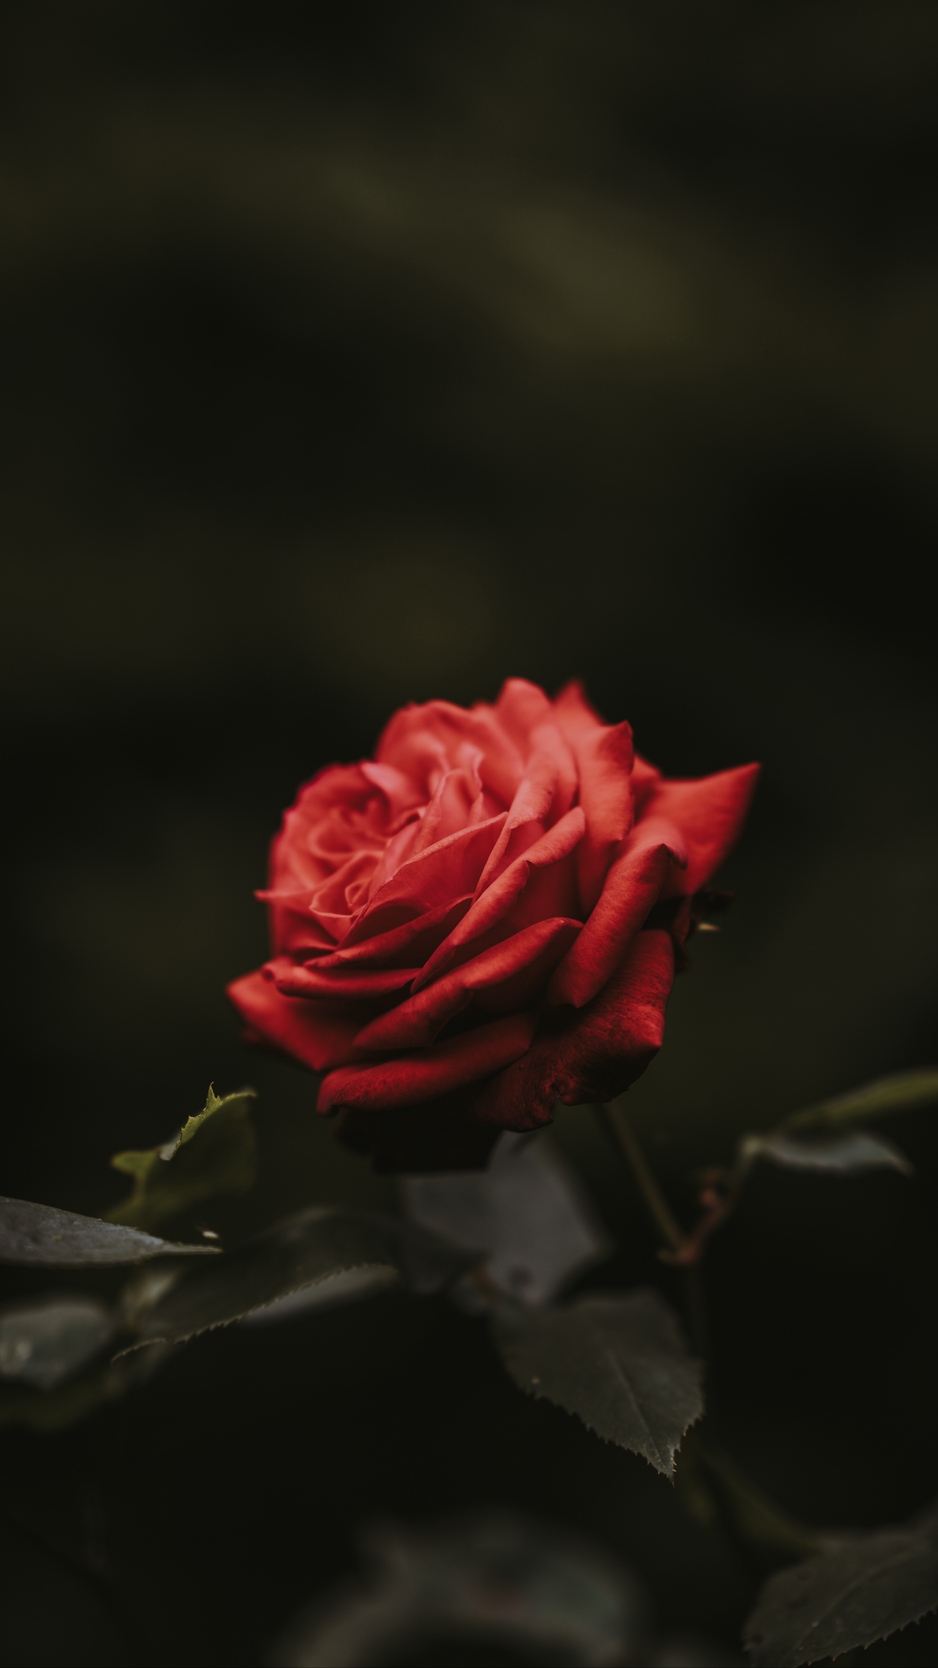 Wallpaper Rose, Bud, Red, Flower, Blur - Iphone Red Rose Wallpaper Hd - HD Wallpaper 